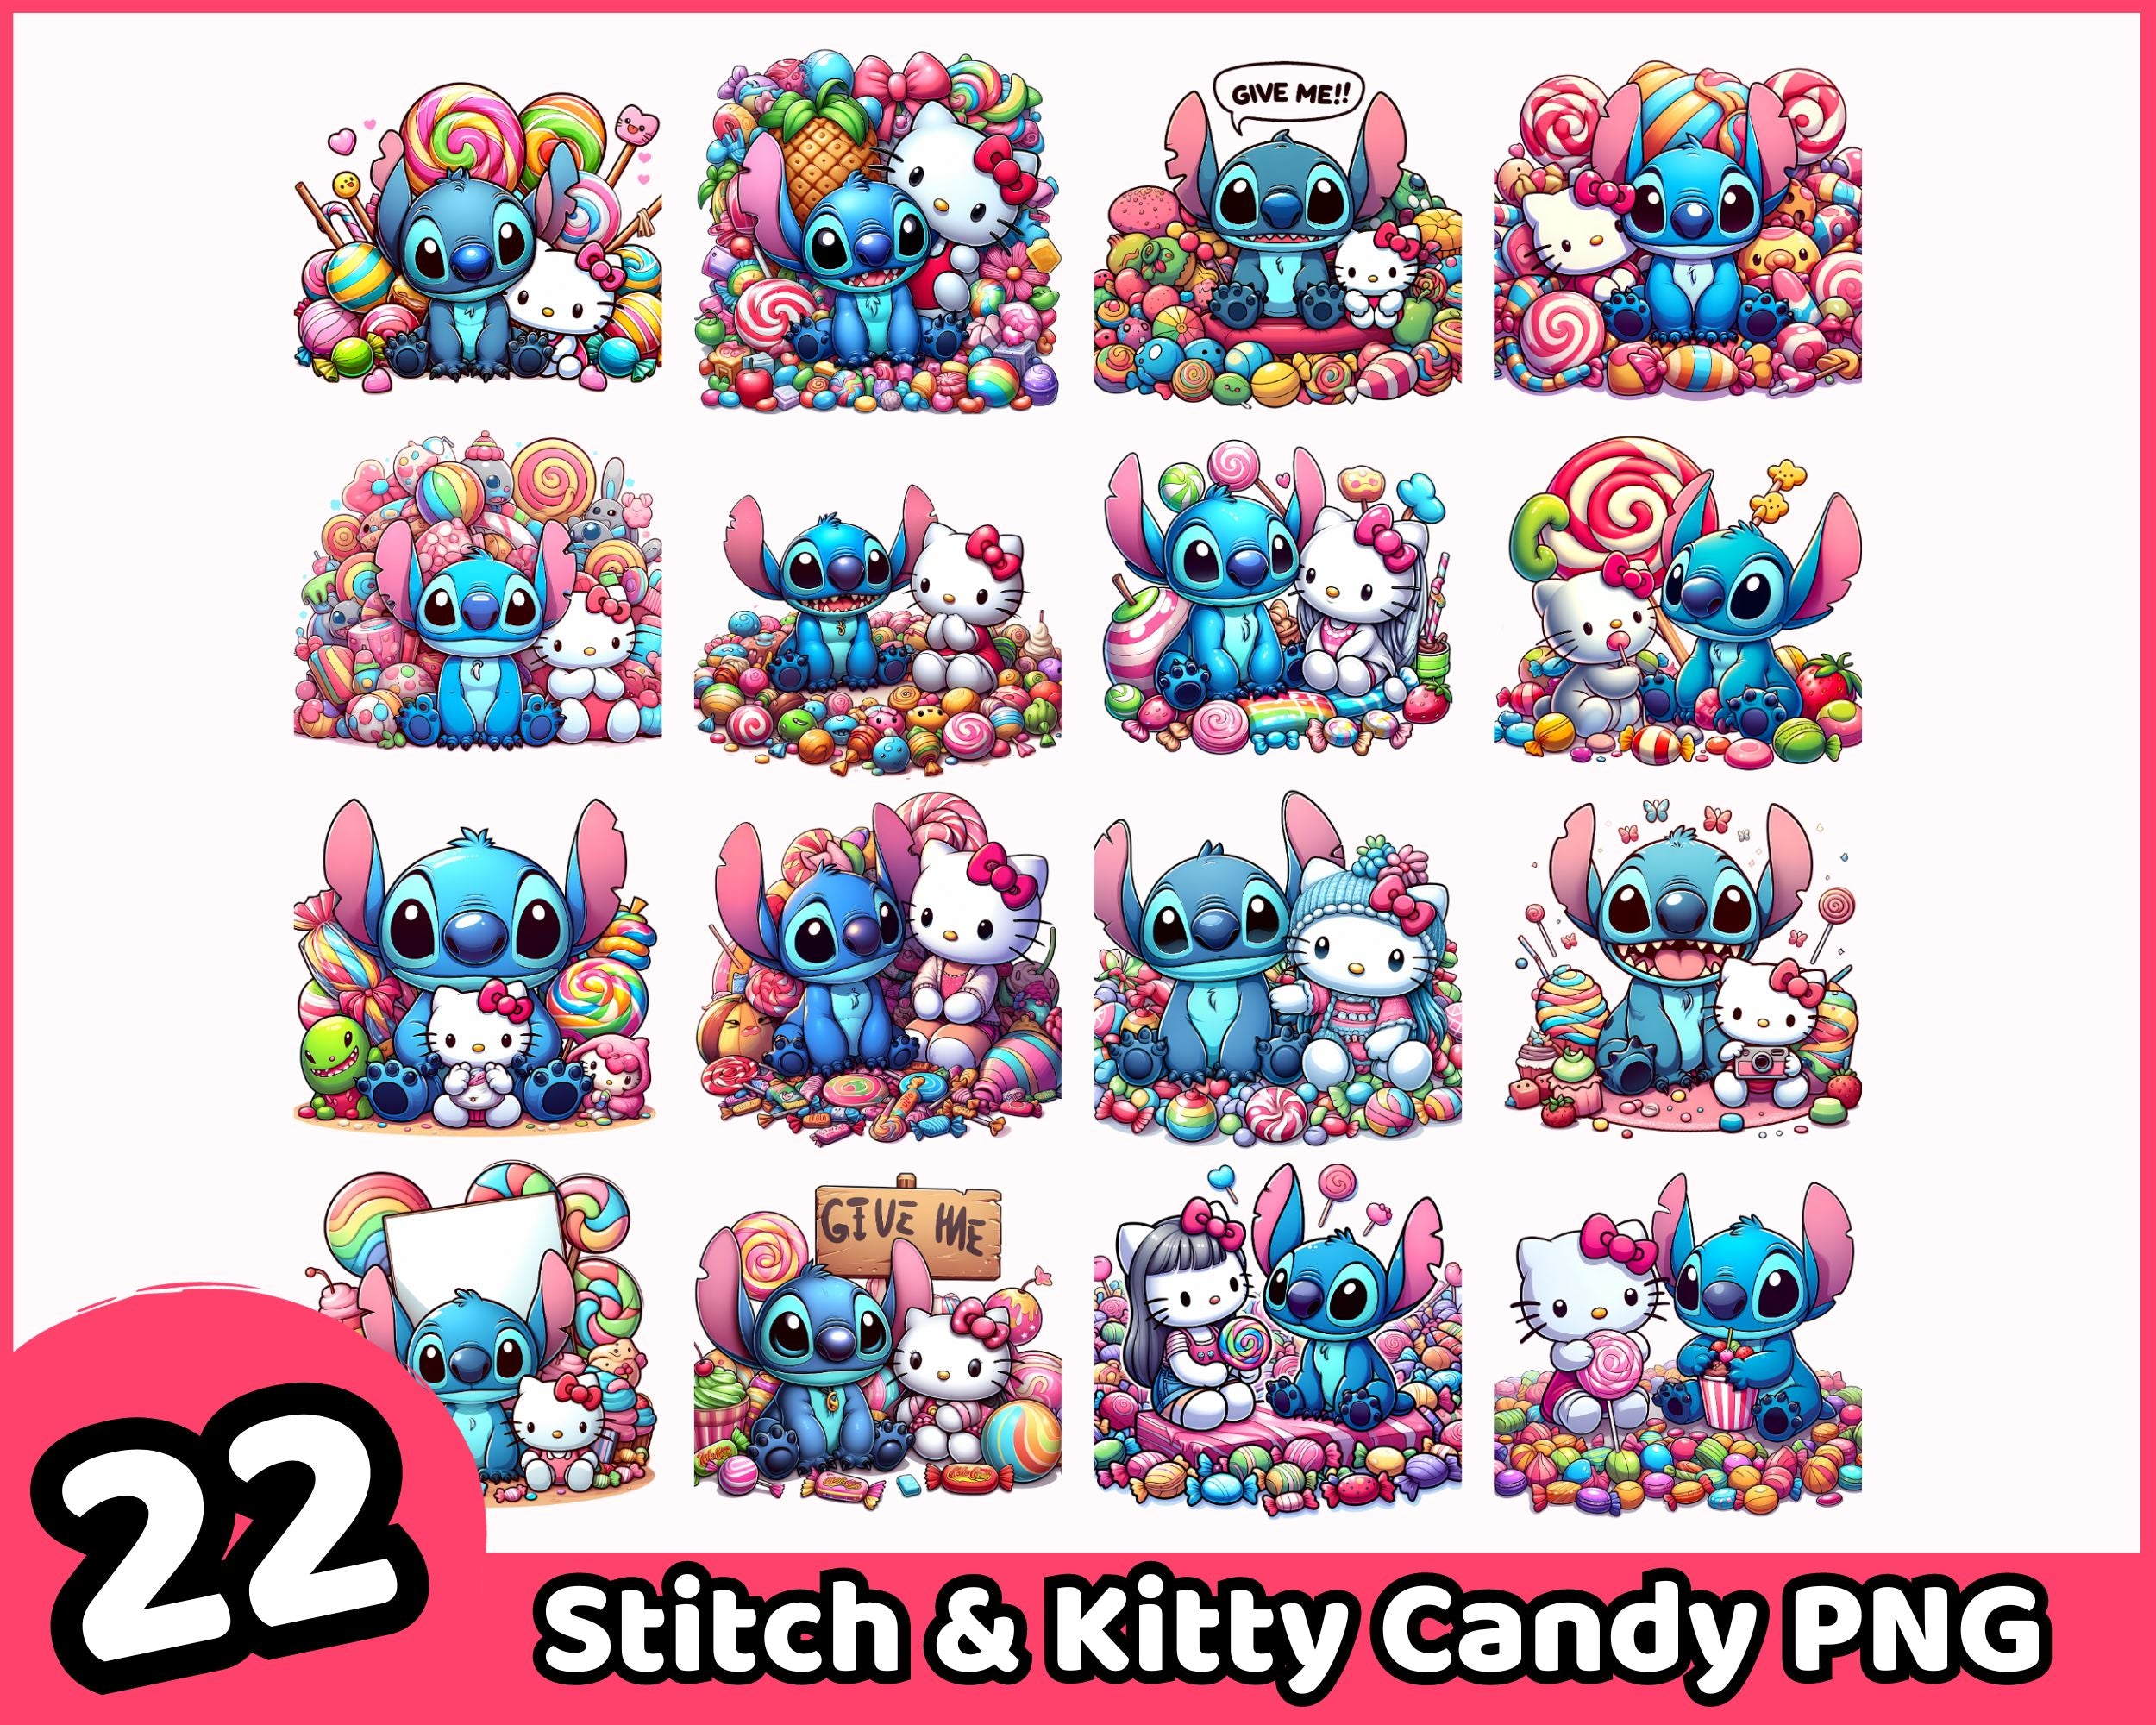 22+ Stitch and Kitty Candy Png Bundle, Hello Pink Kitty PNG, Hello Christmas Kitty PNG